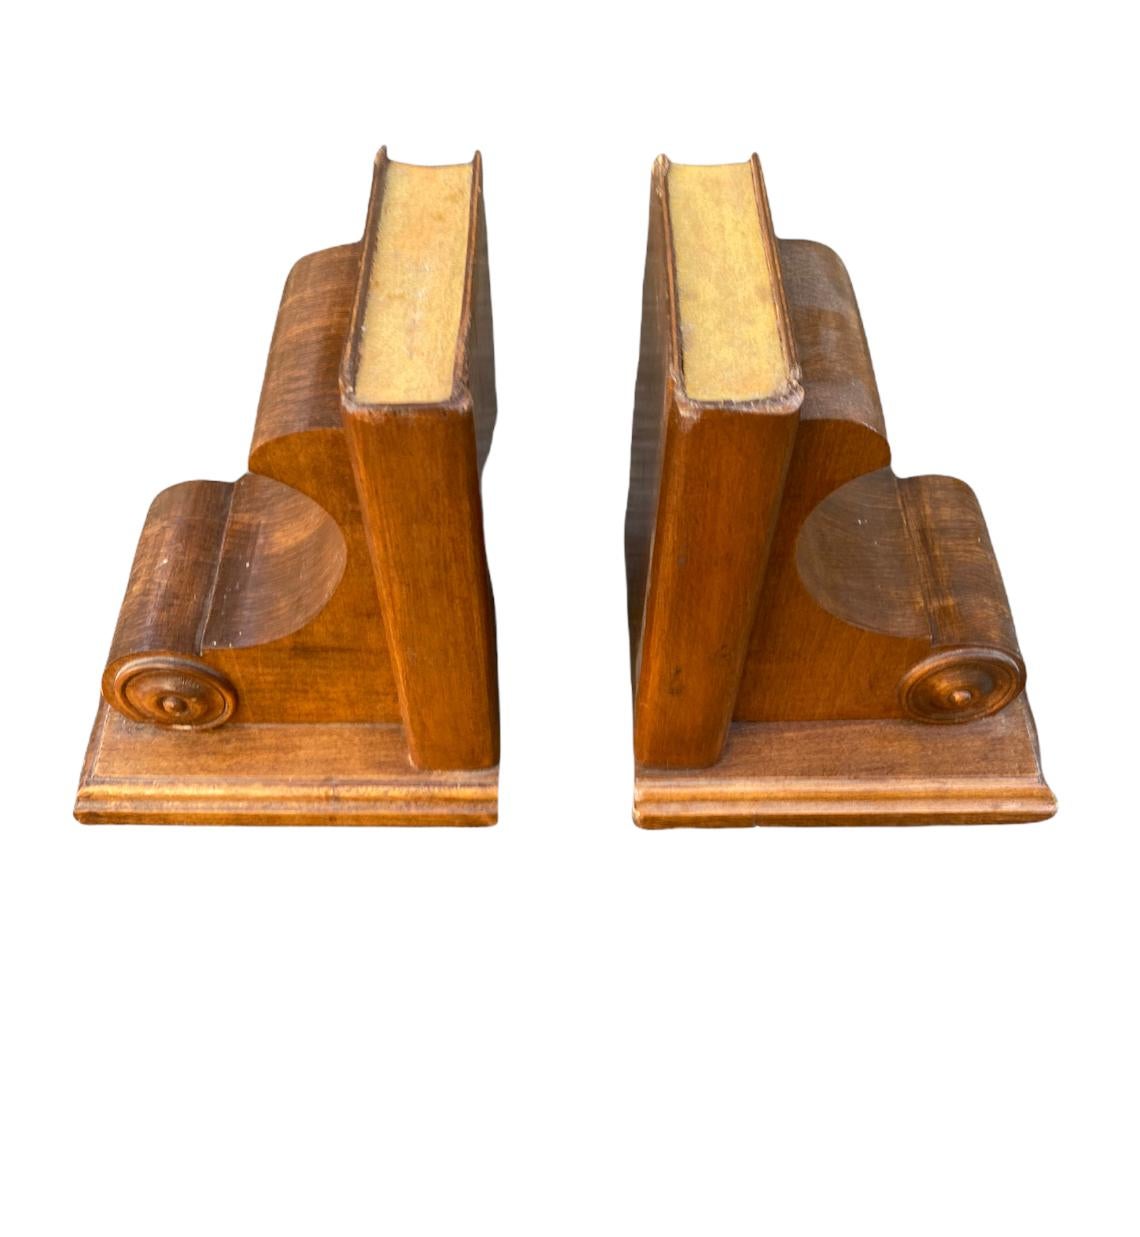 Antique wooden book ends with academic motif. Featuring book and scroll design. Health line underneath to prevent scratching on many surfaces.